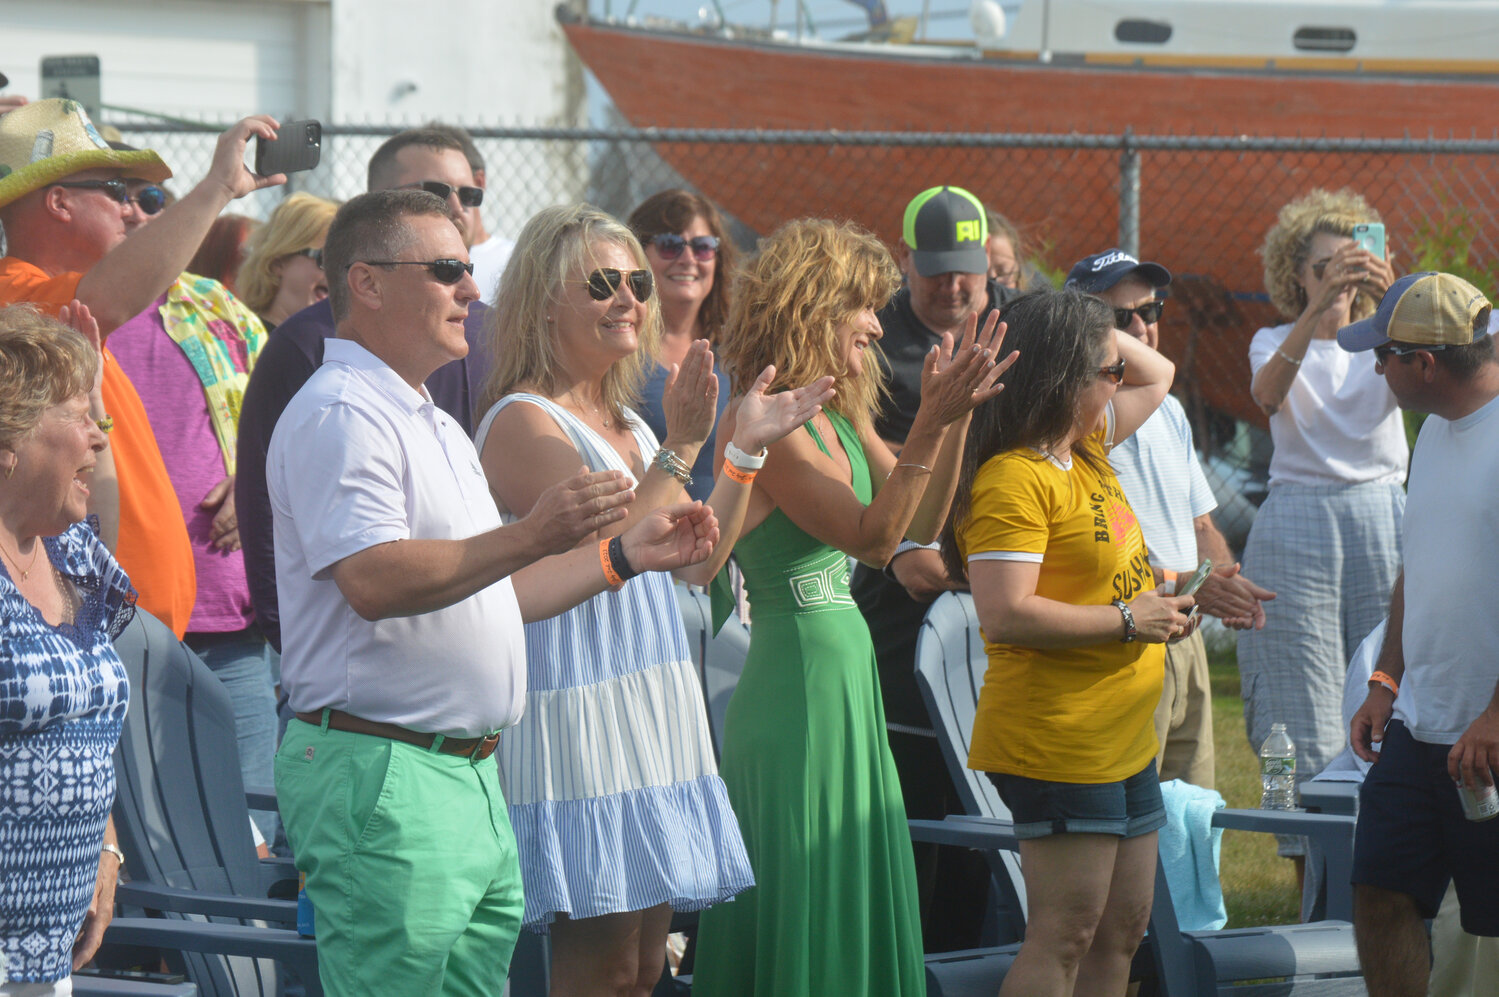 Members of the crowd groove to the sounds of “Margaritaville” and other Buffett hits.